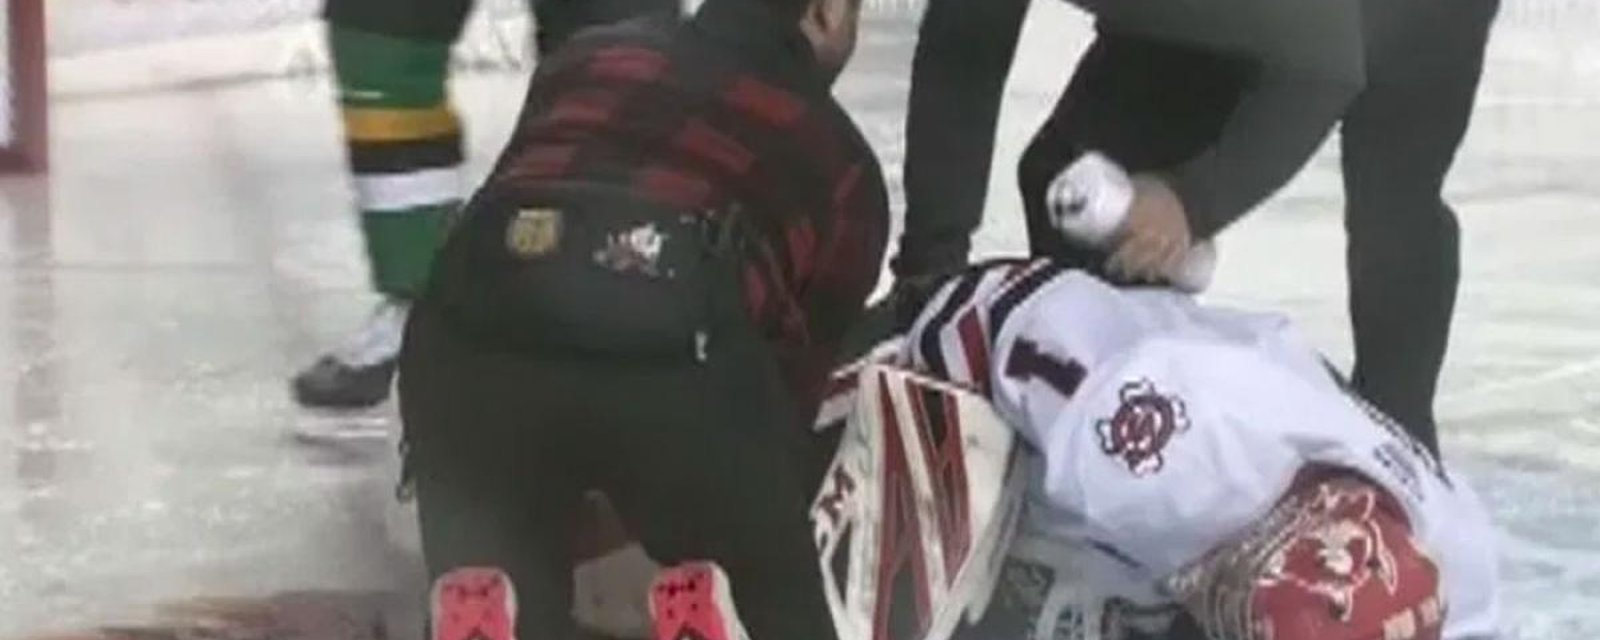 Finally an update on goalie Tynan who nearly bled to death during OHL game!